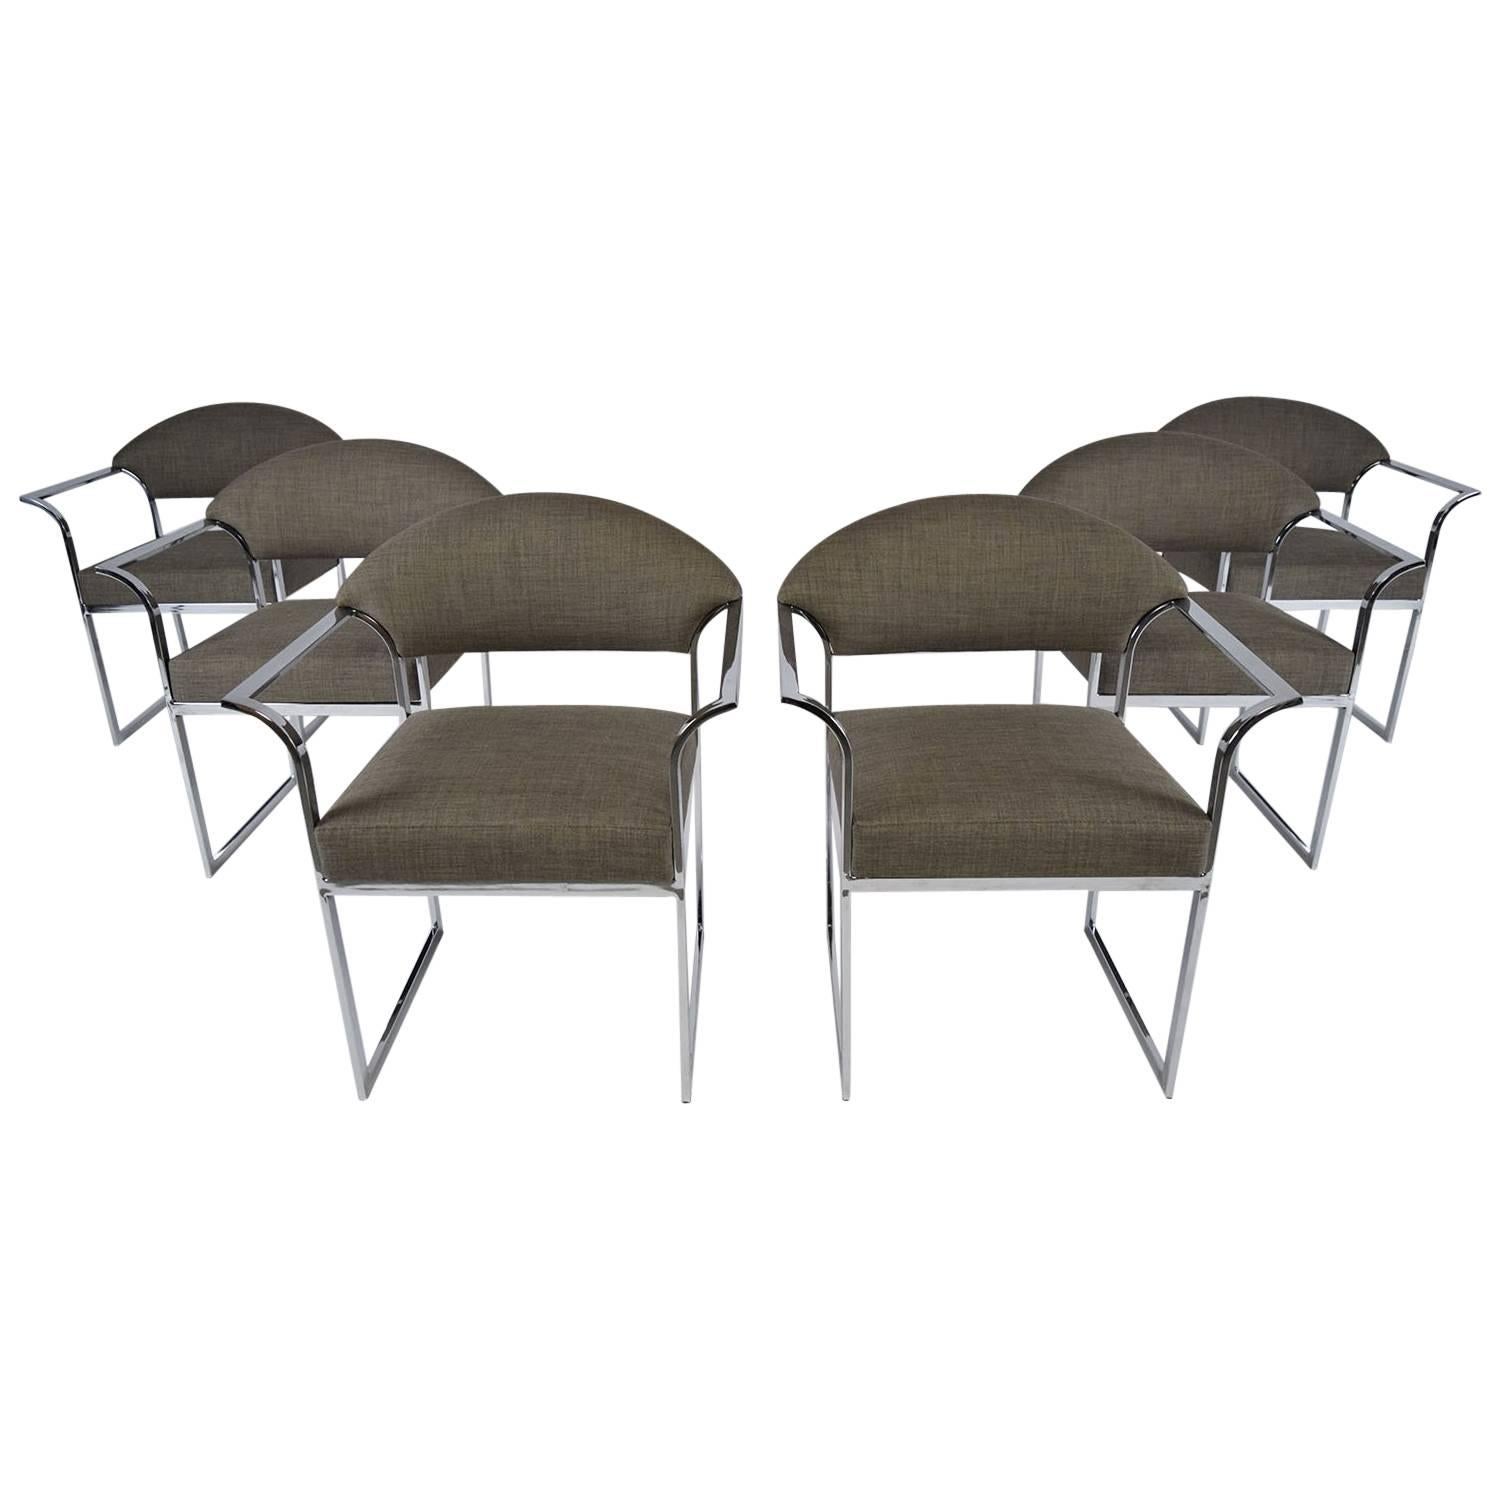 Set of 6 Mid-Century Modern Chrome Dining Chairs